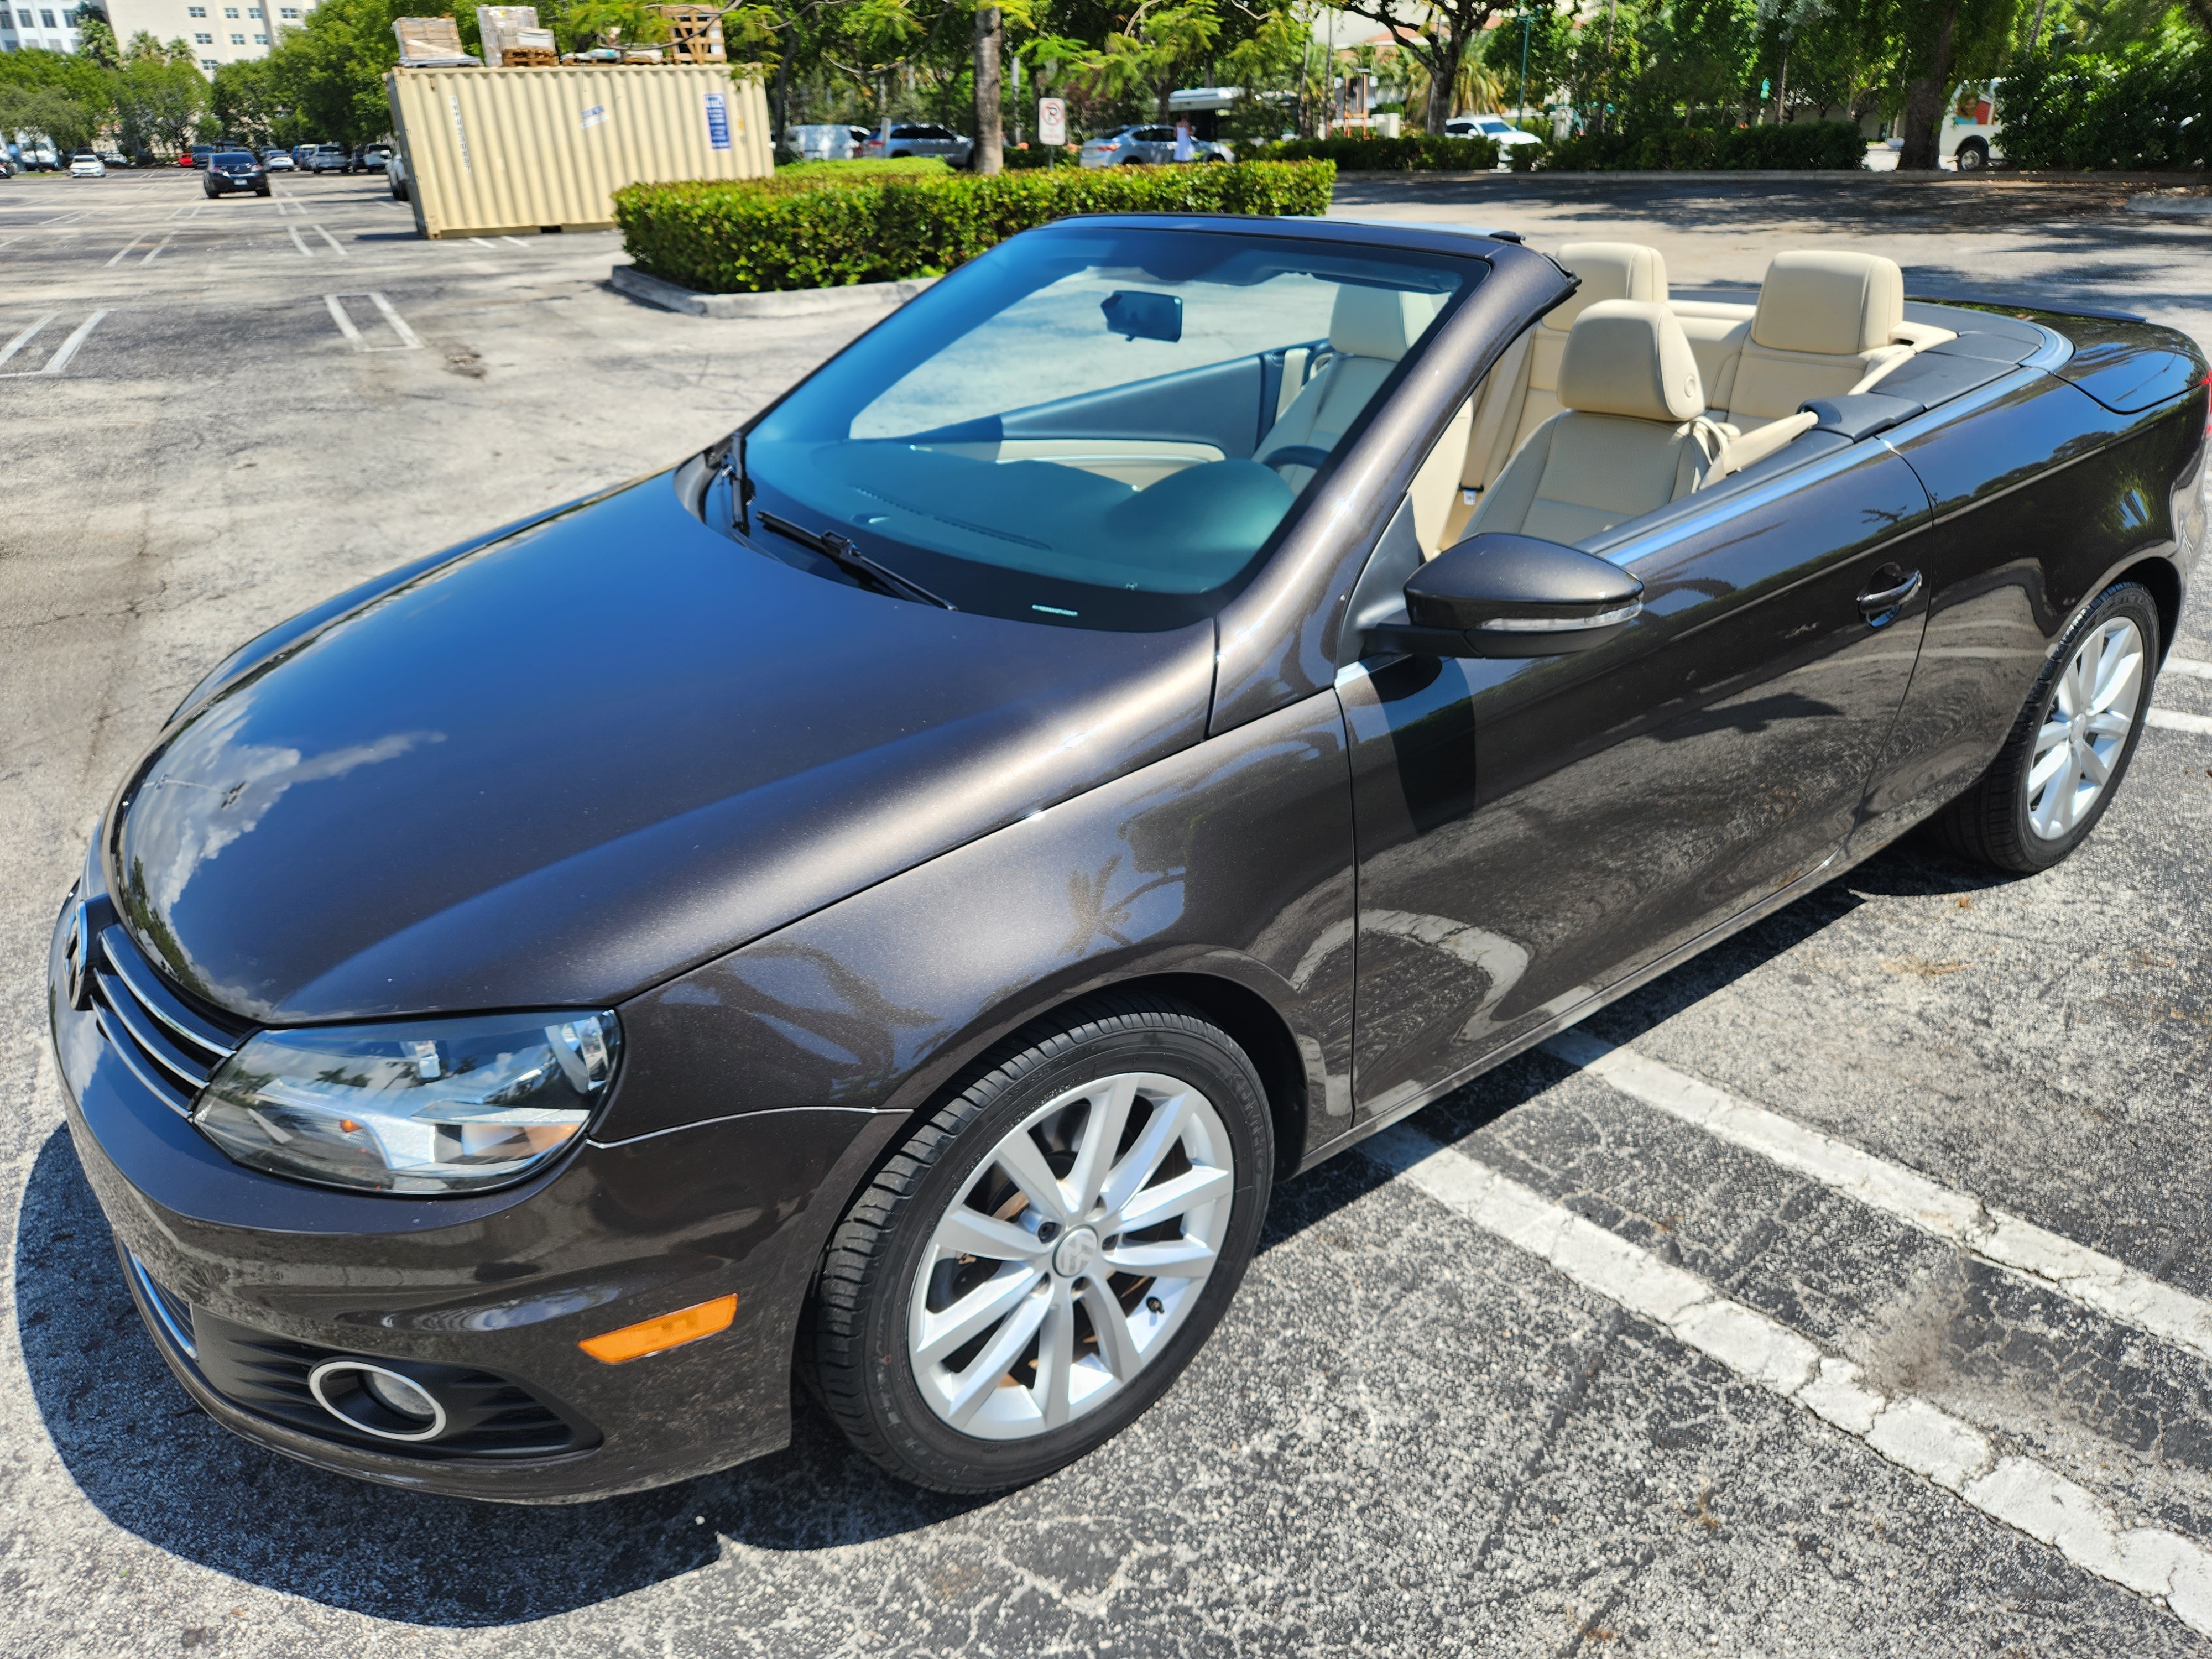 Used 2015 Volkswagen Eos Final Edition Convertible 2D Prices